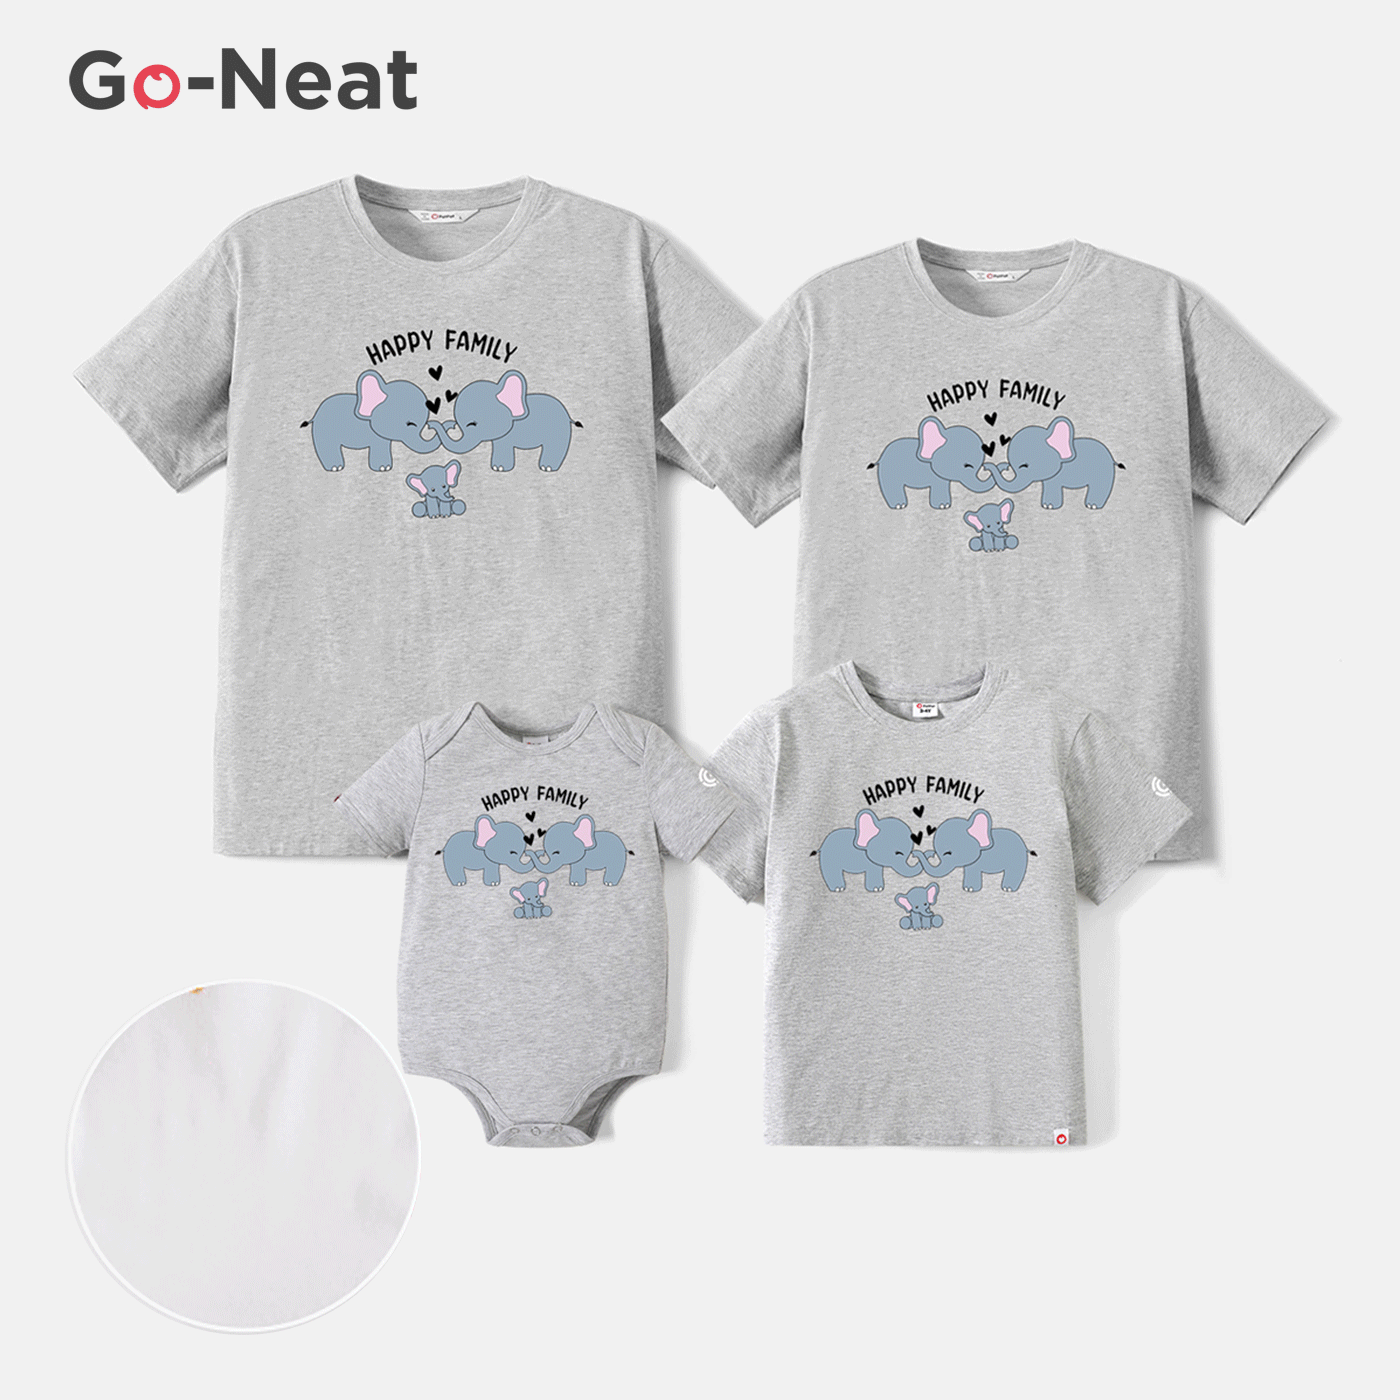 

Go-Neat Water Repellent and Stain Resistant Family Matching Elephant & Letter Print Short-sleeve Tee